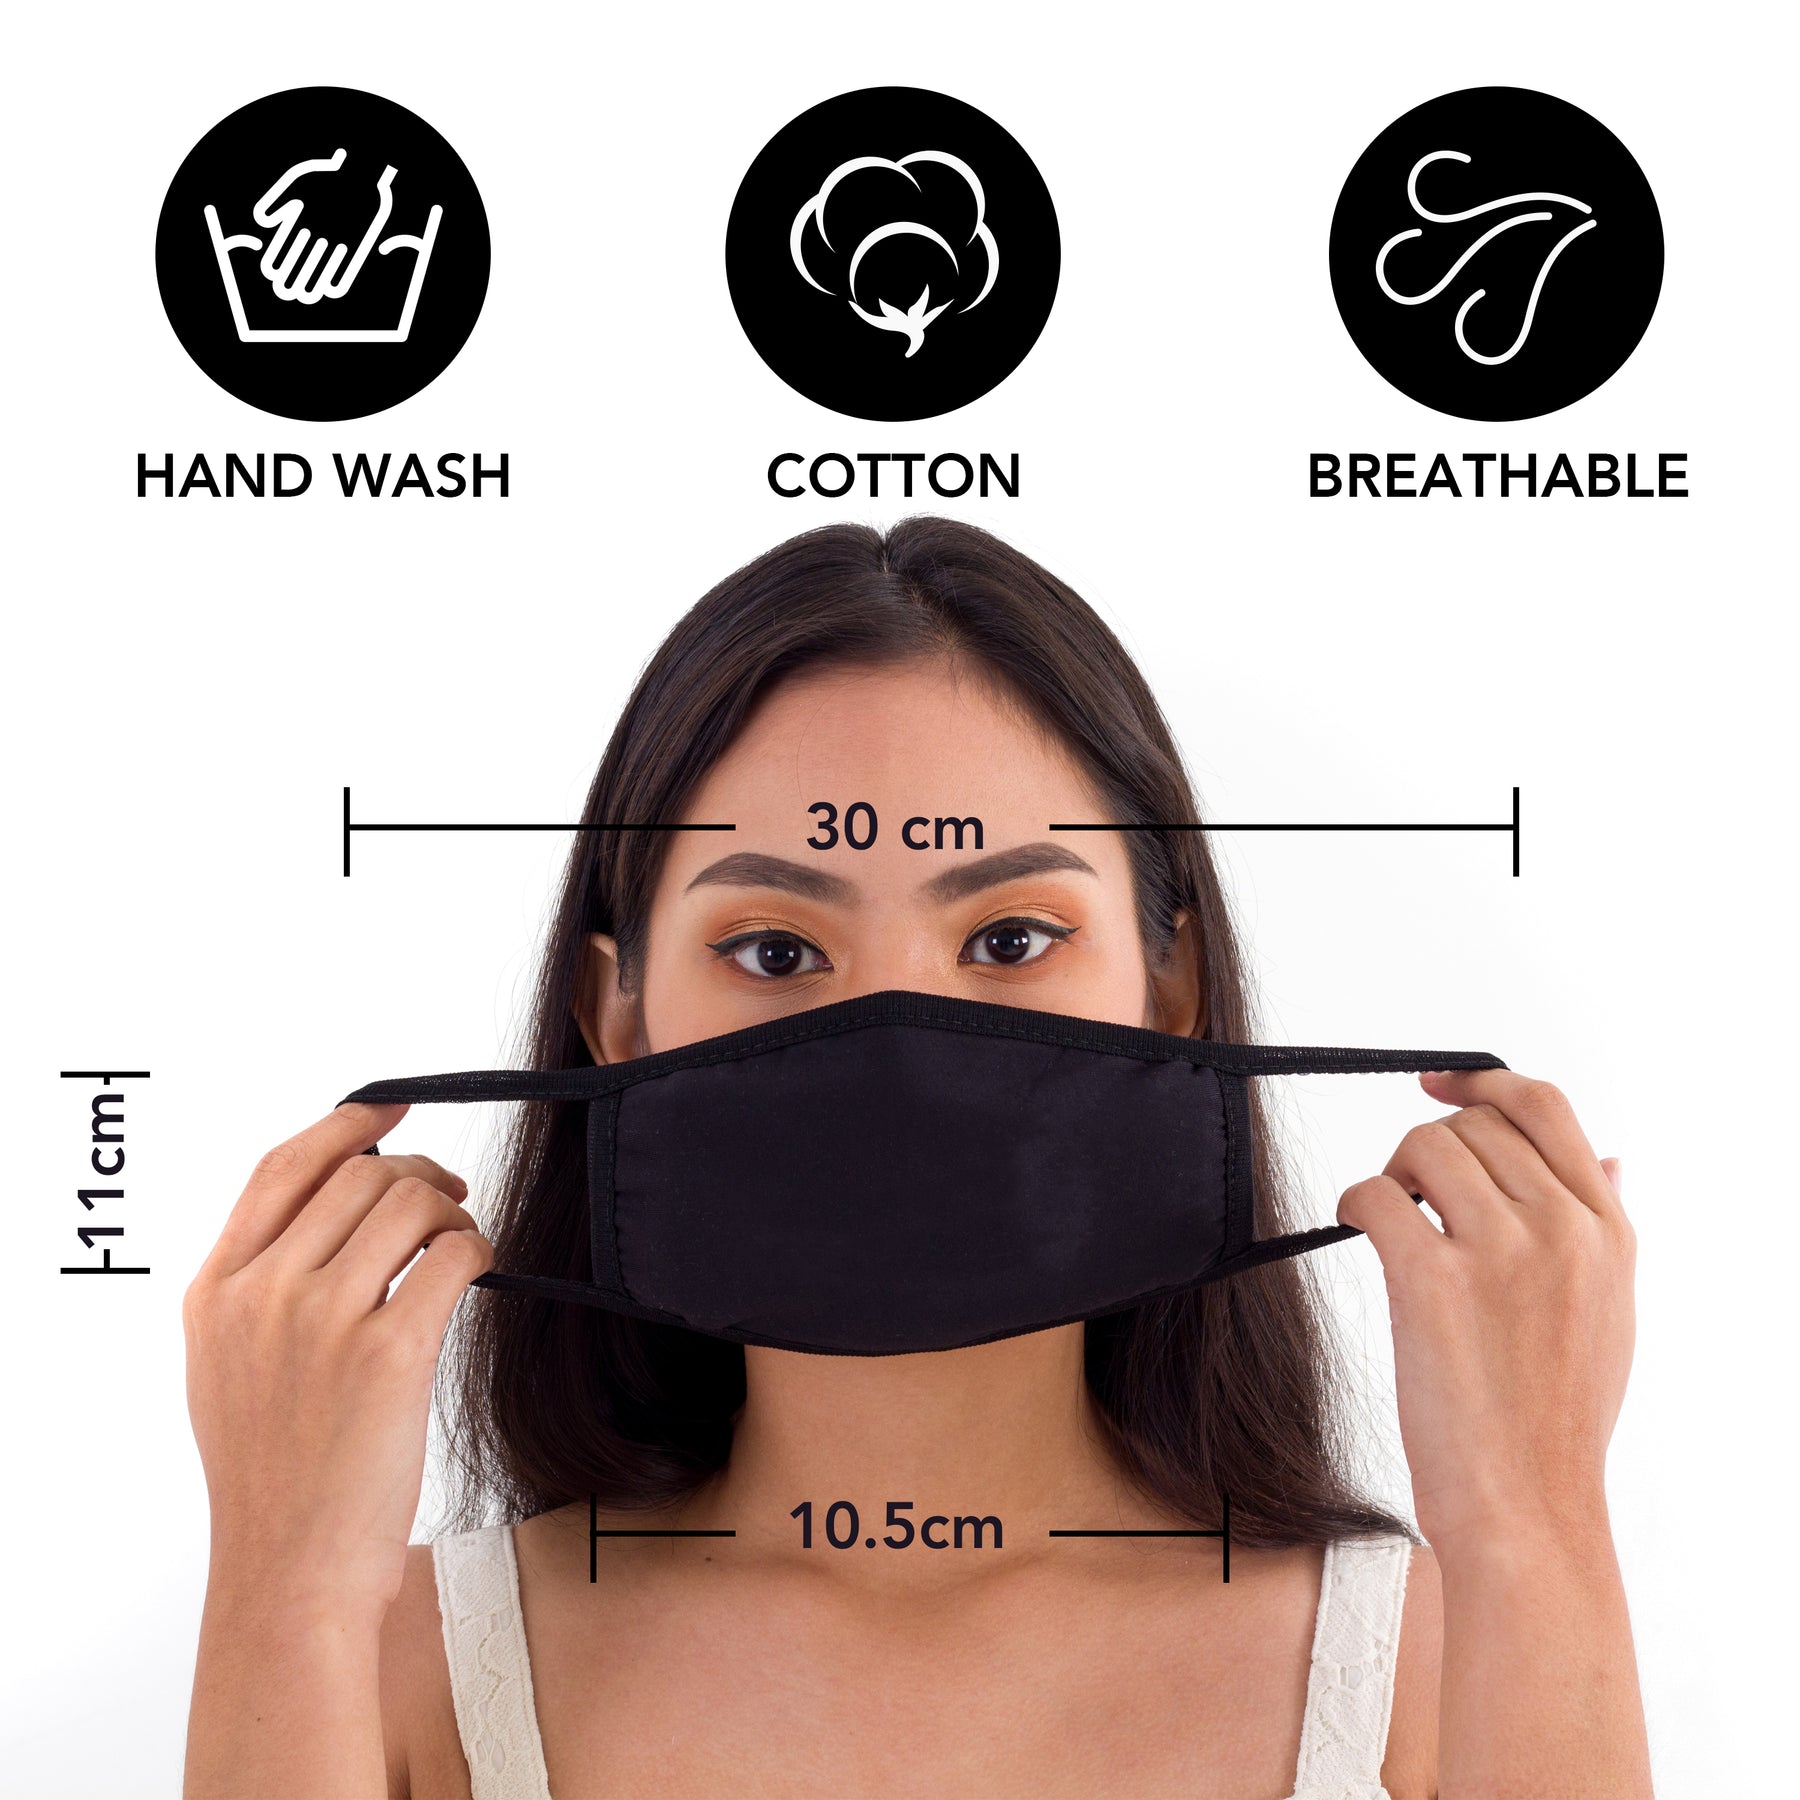 Black Face Mouth Mask - Cotton Face Covering (10 Pack) - Face Mask Resuable, Washable, Breathable, Adjustable